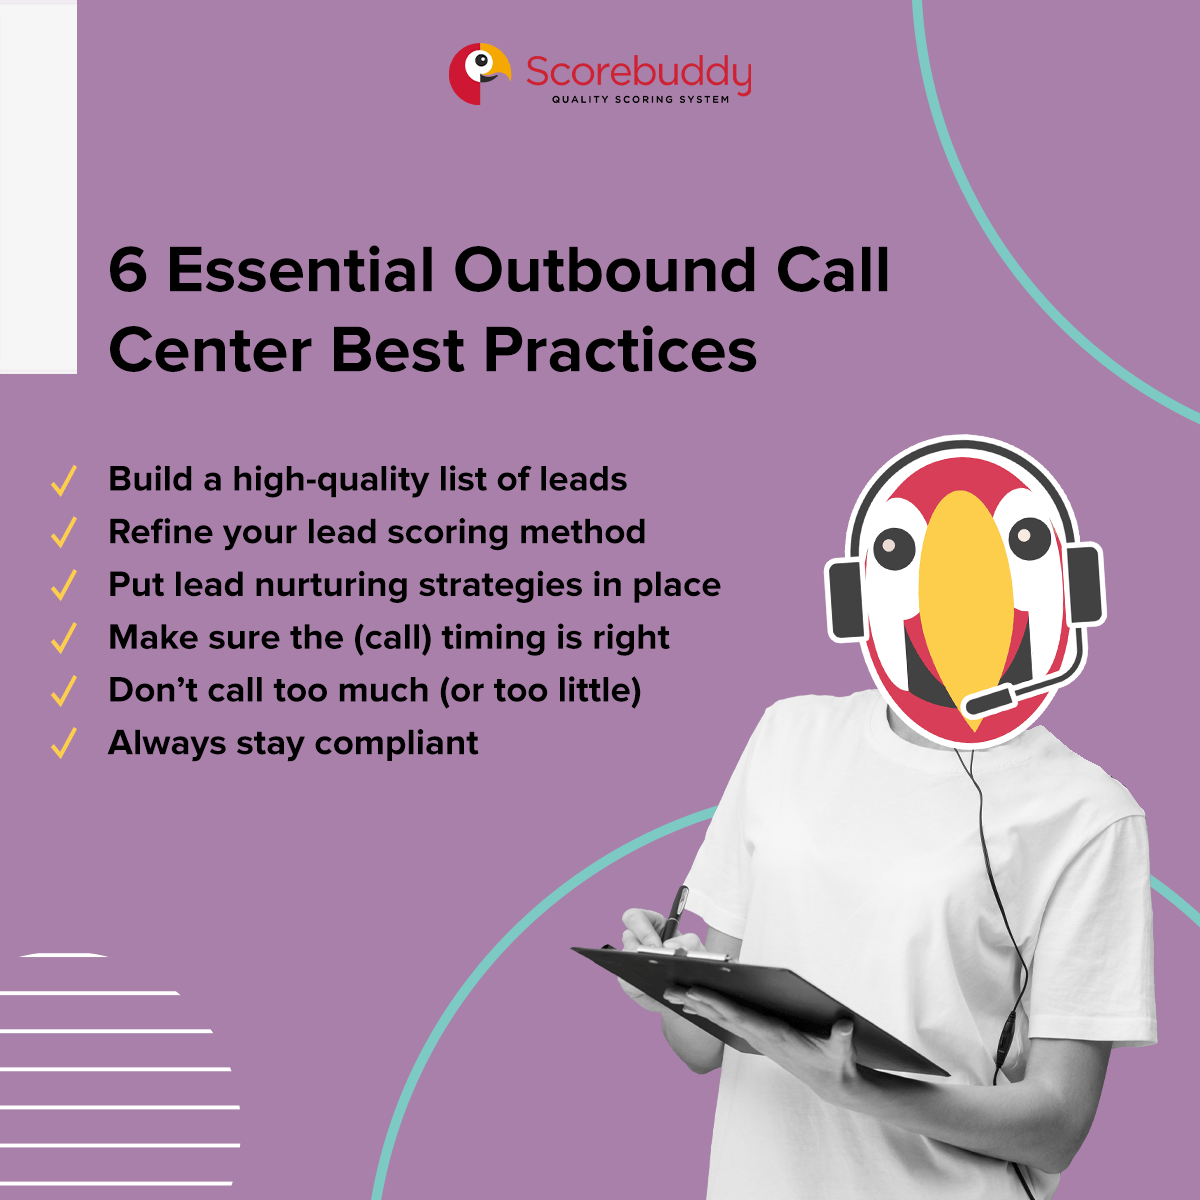 How to Run an Outbound Call Center Best Practices Tips